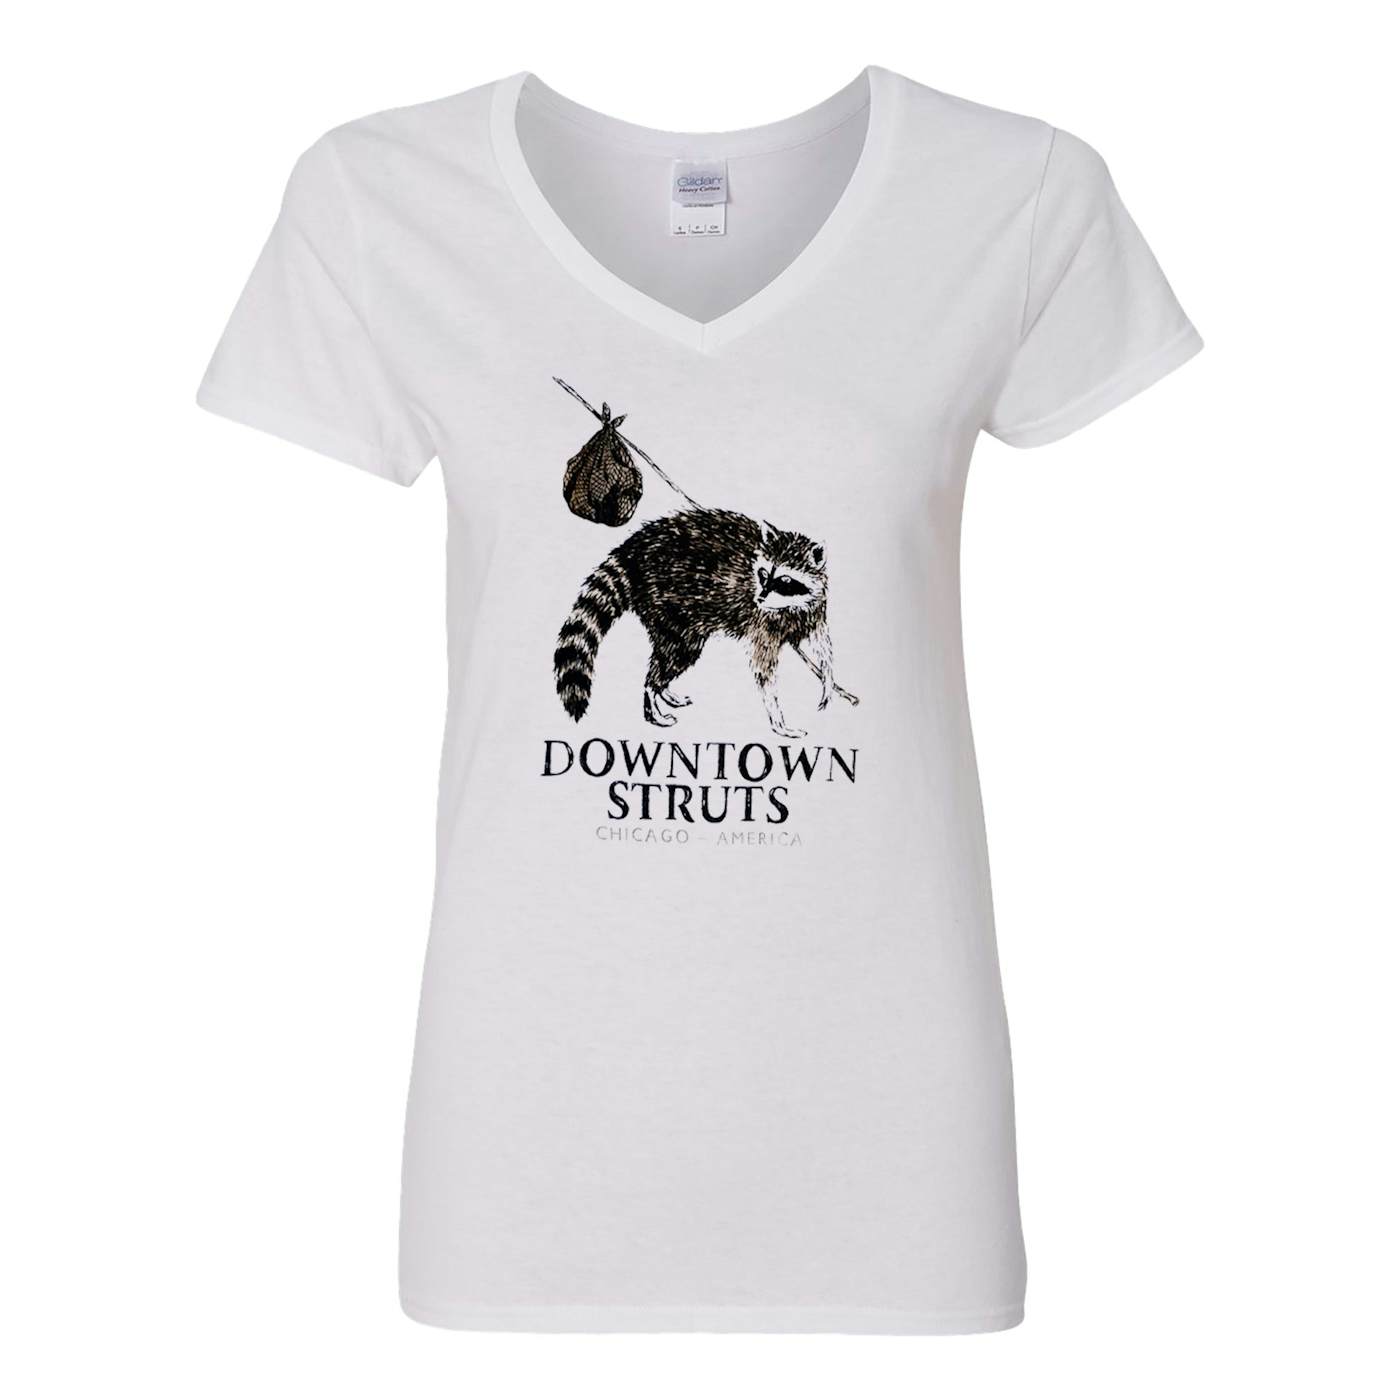 Downtown Struts - Raccoon - White - V-Neck - T-Shirt - Fitted